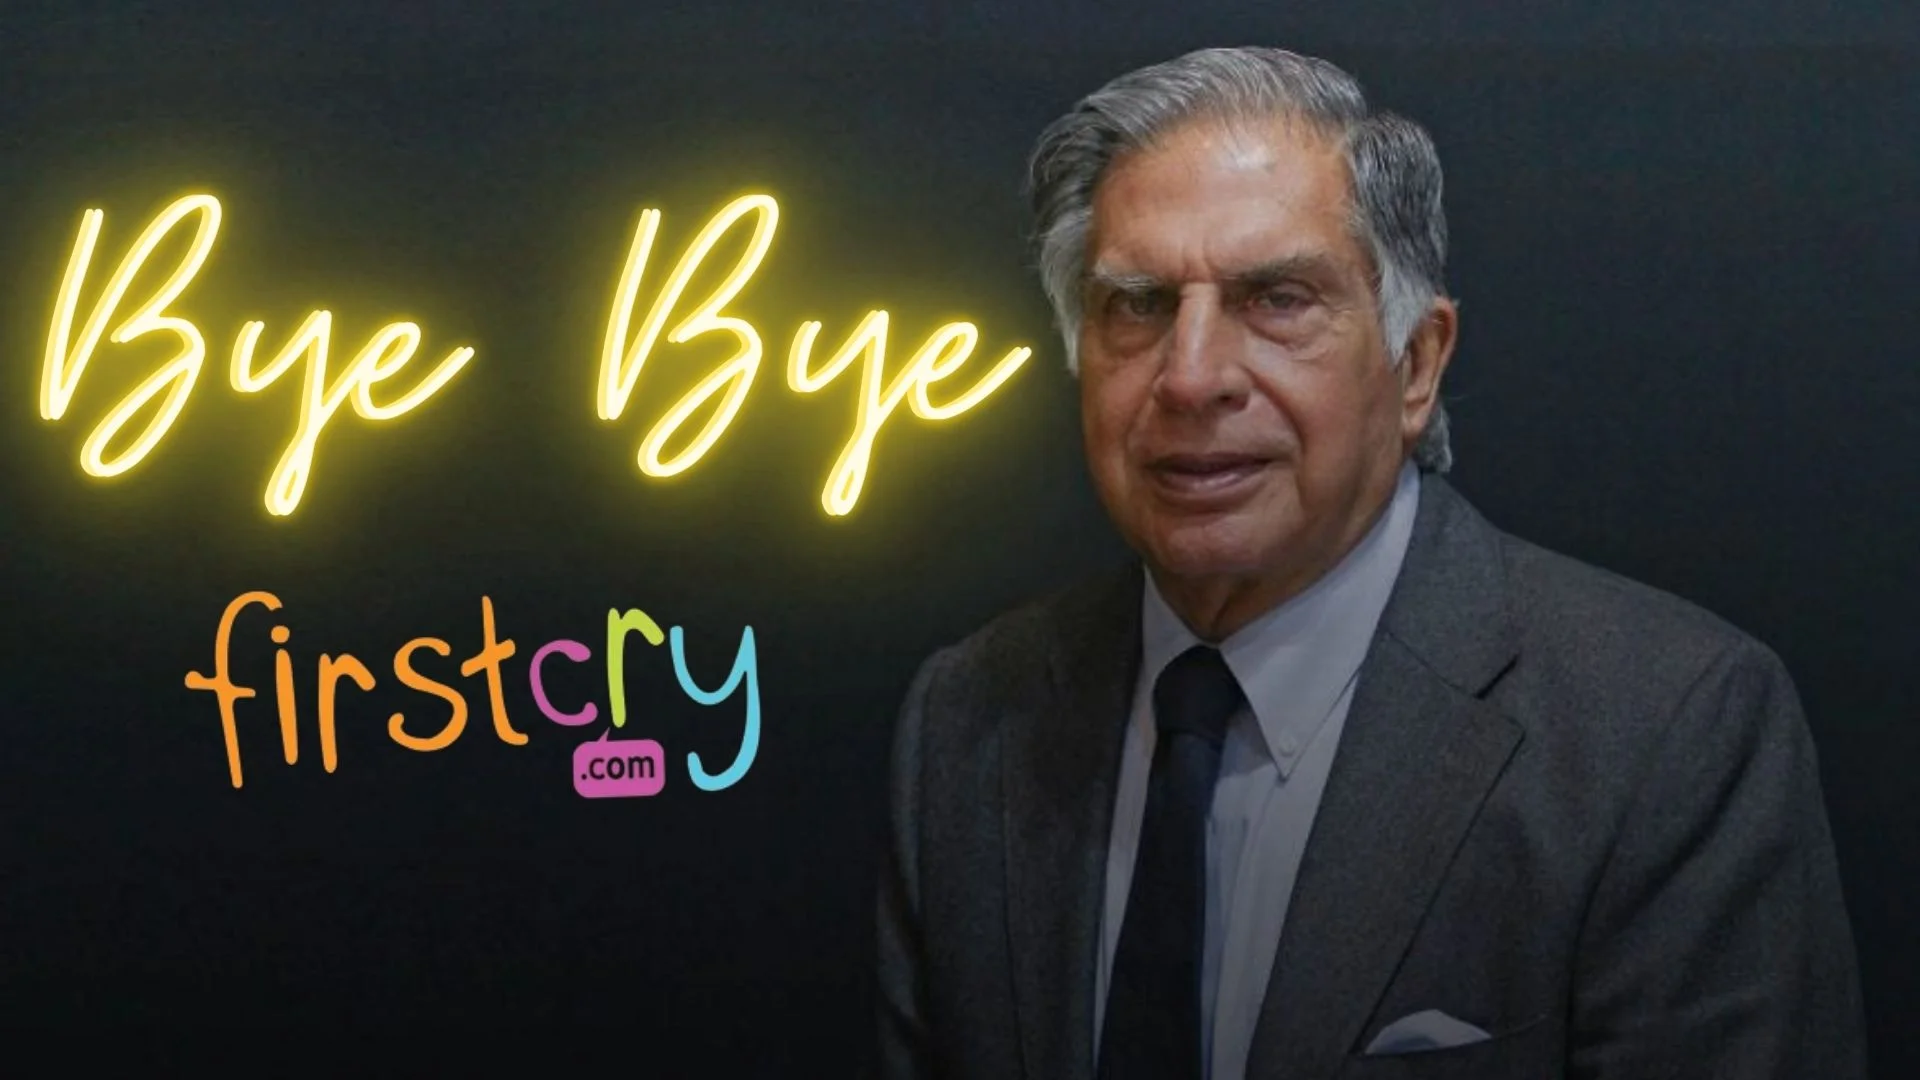 Ratan Tata decided to sell FirstCry